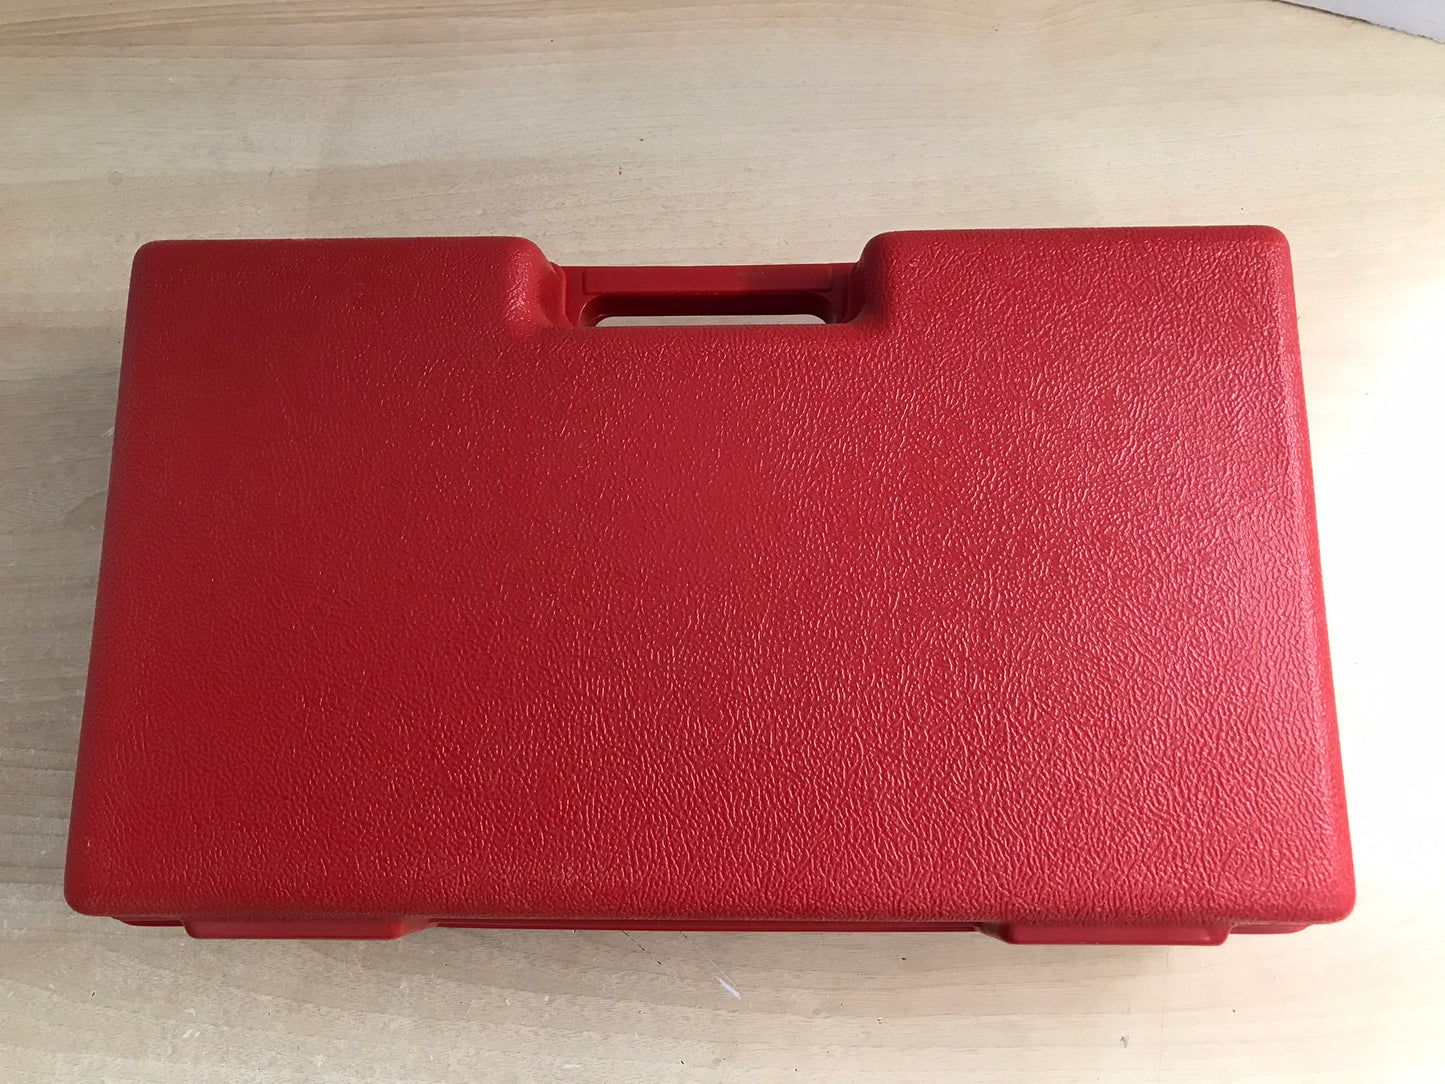 LEGO Red Storage Case Vintage 1982 Collectible Made in USA 16x10x5 RARE